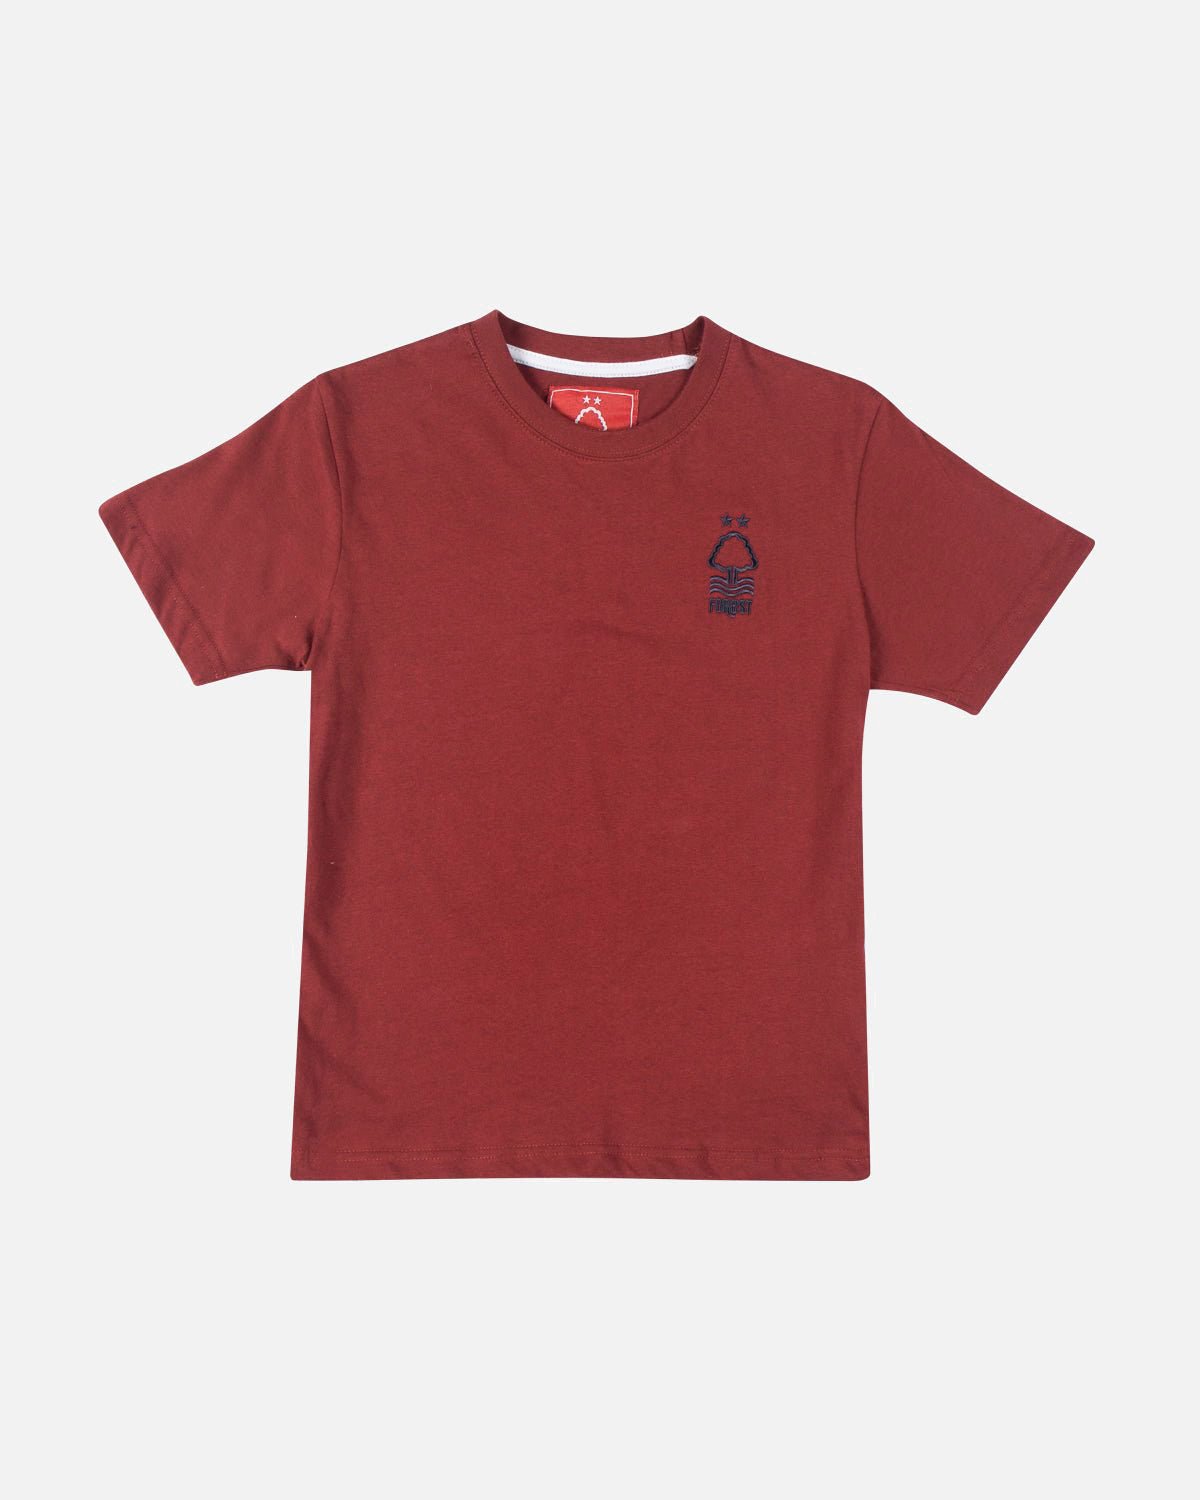 NFFC Junior Red Essential T- Shirt - Nottingham Forest FC